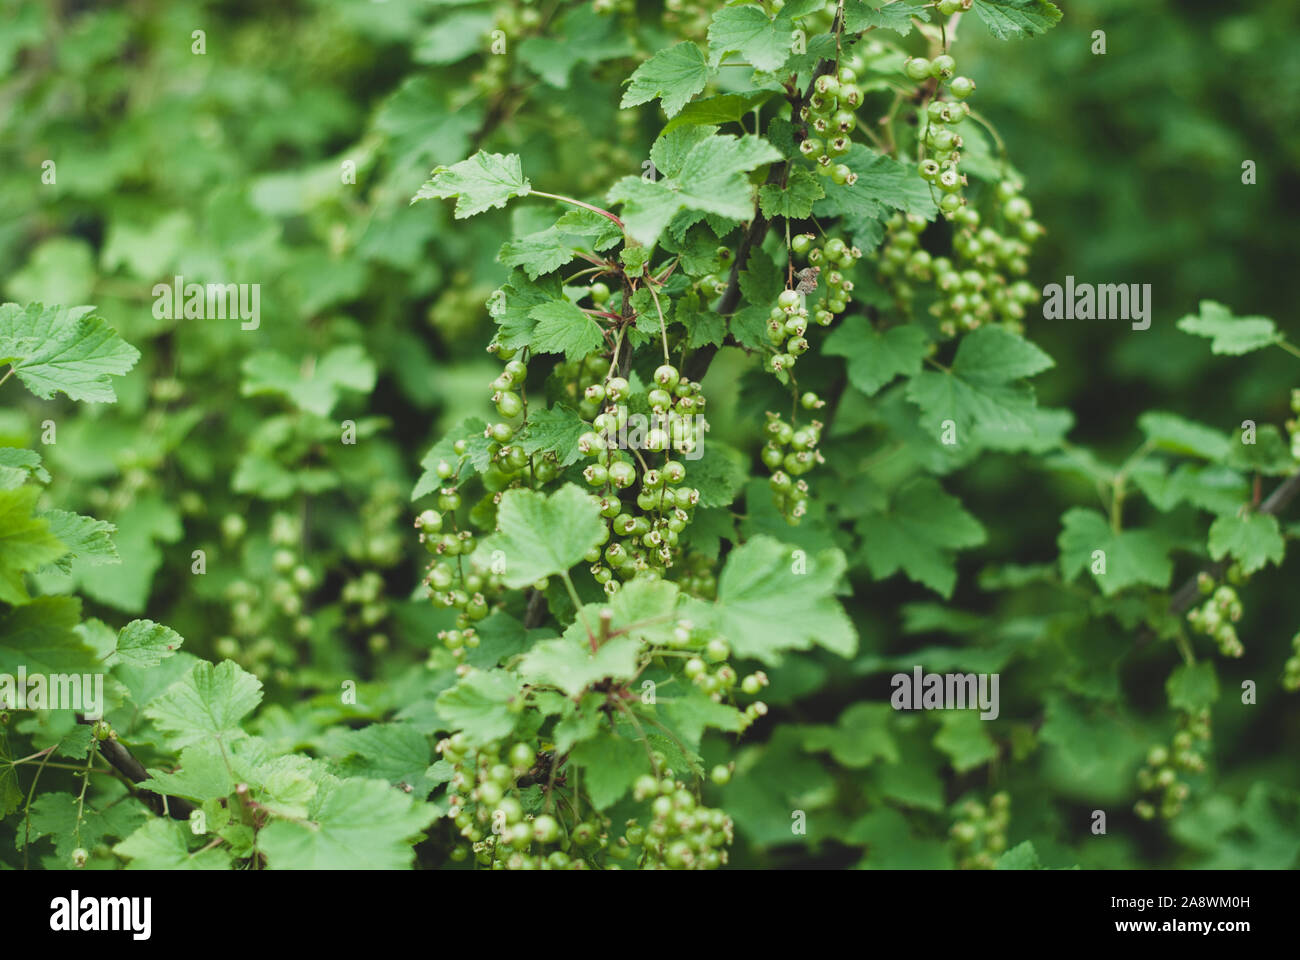 Soft fruit berries -  white currants growing on the plant Stock Photo